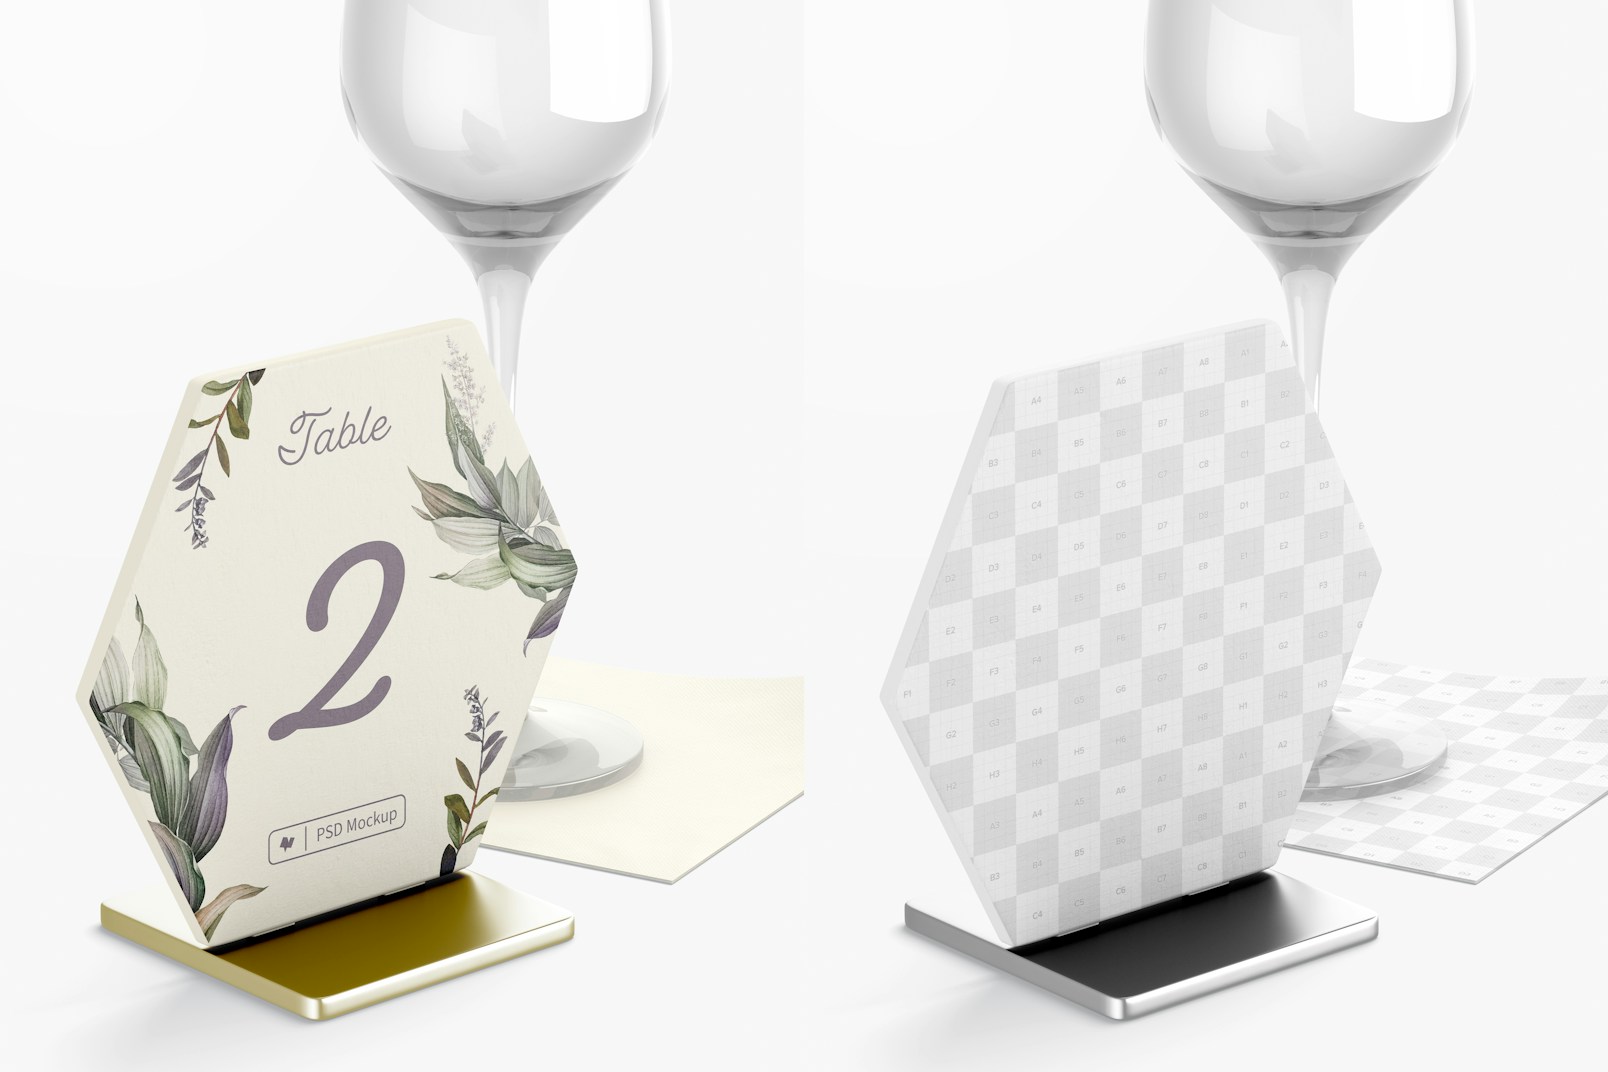 Hexagon Table Card Holder with Cup Mockup